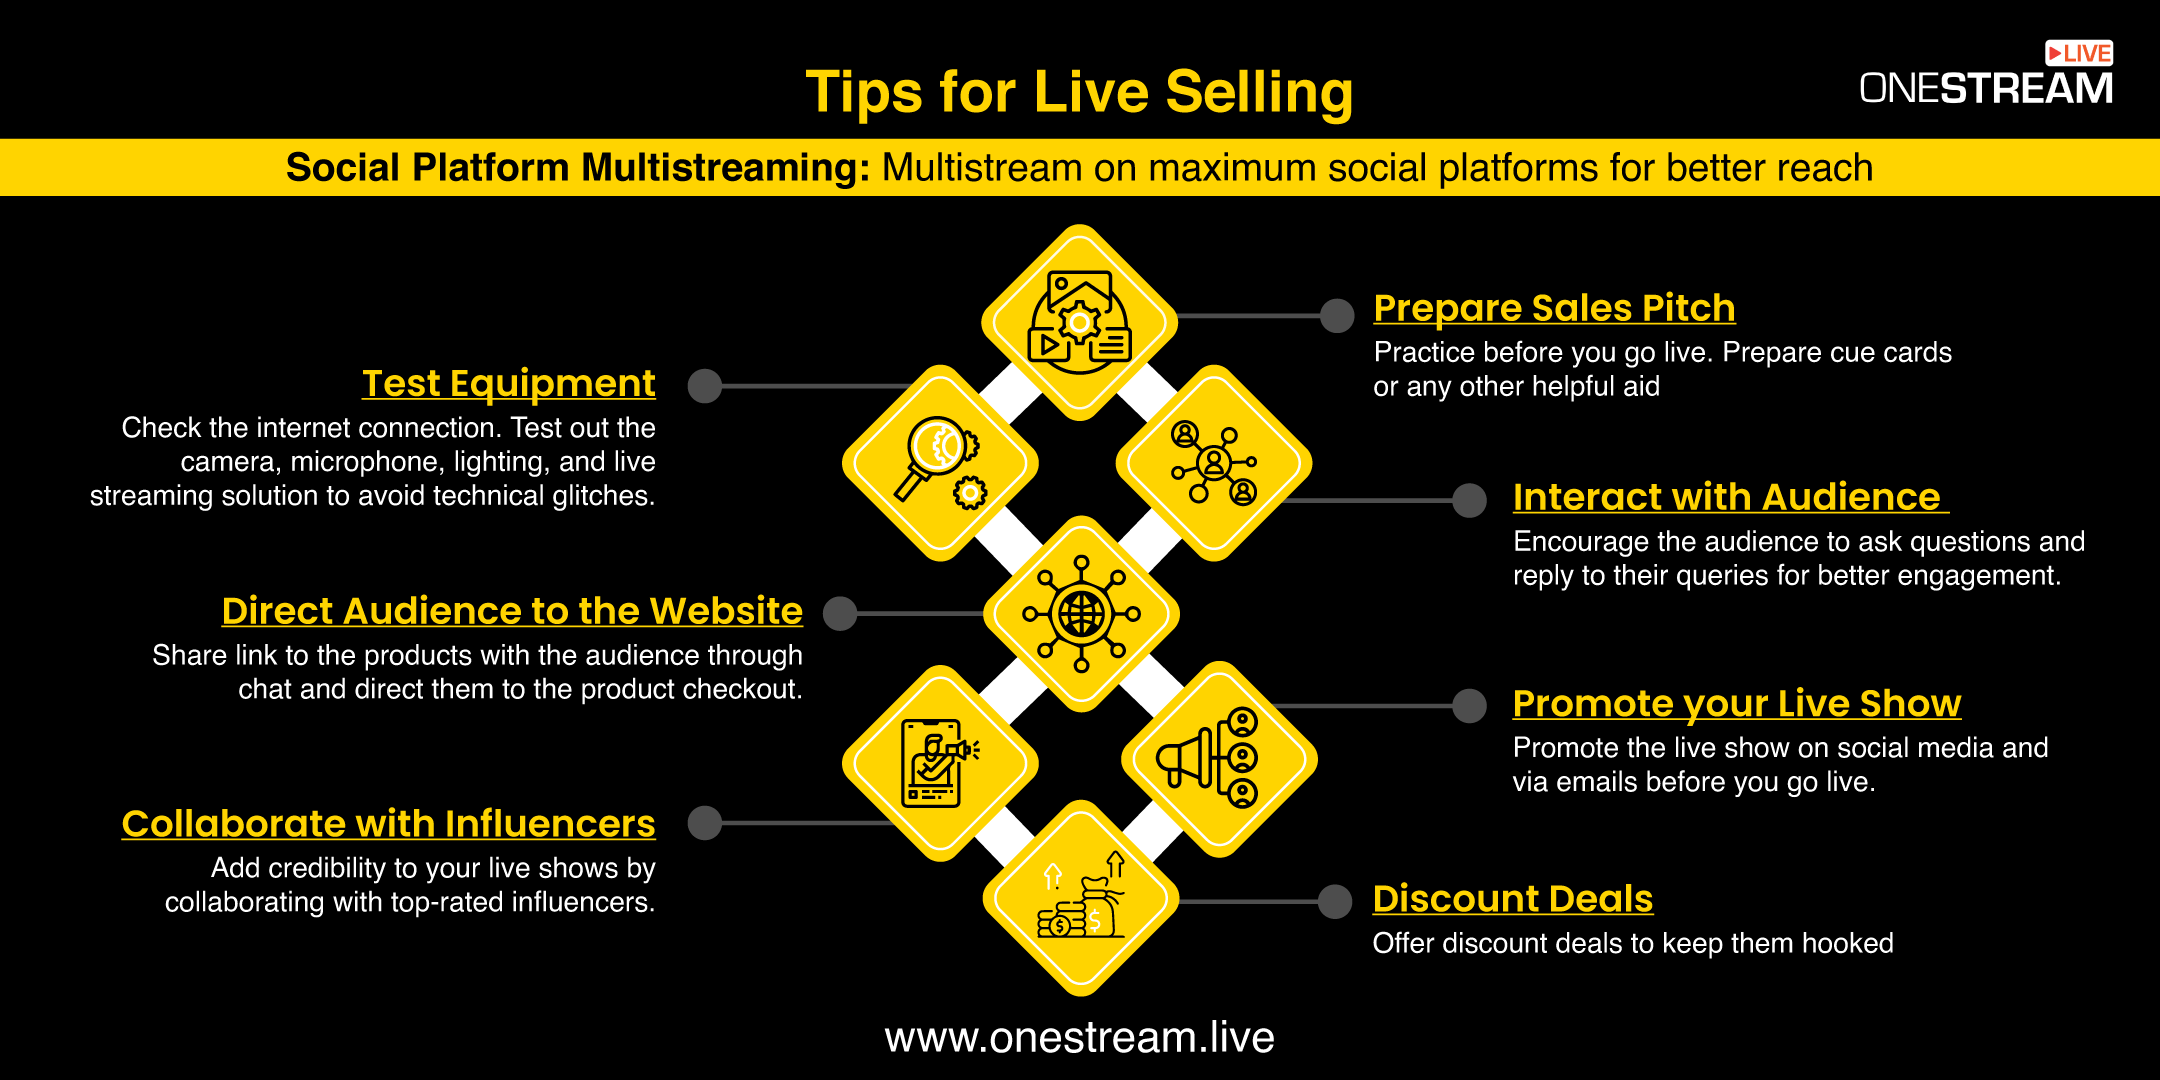 Tips-for-Live-Selling-info